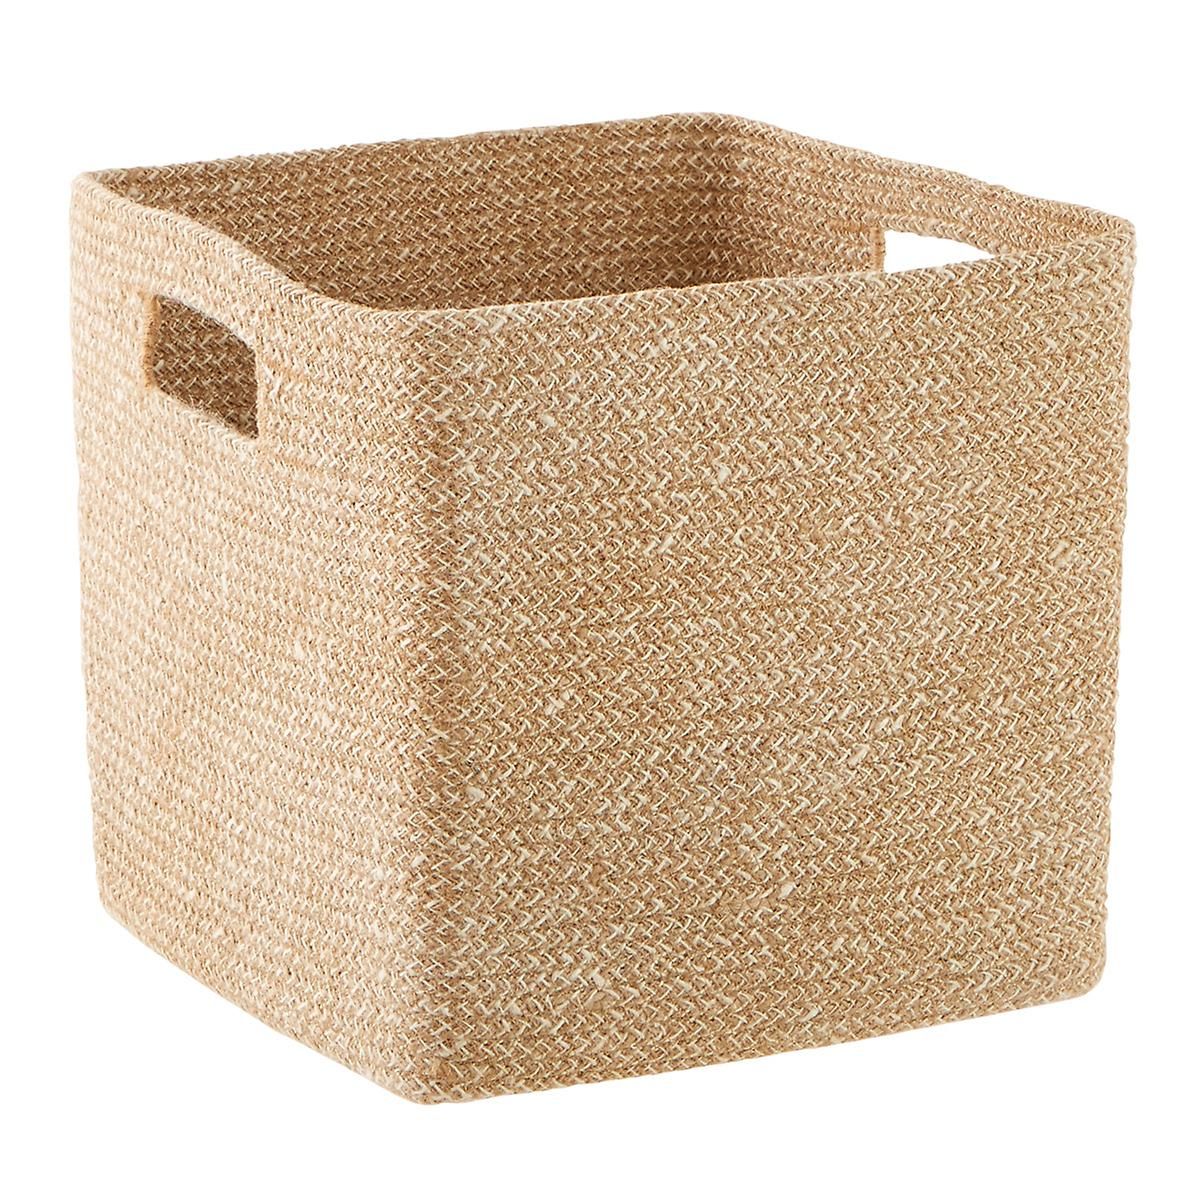 Sand Woven Jute Cubes | The Container Store